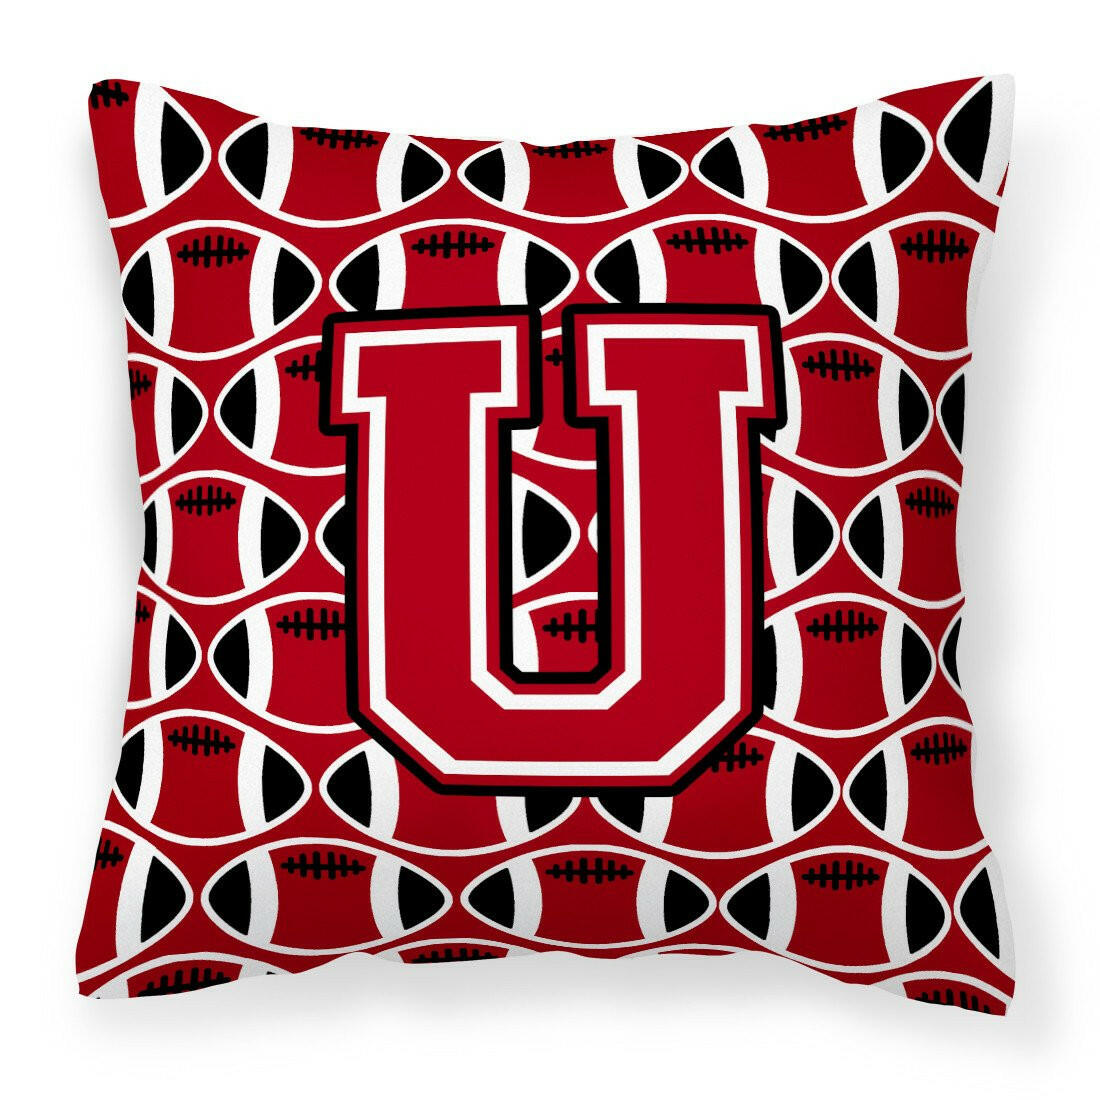 Letter U Football Red, Black and White Fabric Decorative Pillow CJ1073-UPW1414 by Caroline's Treasures